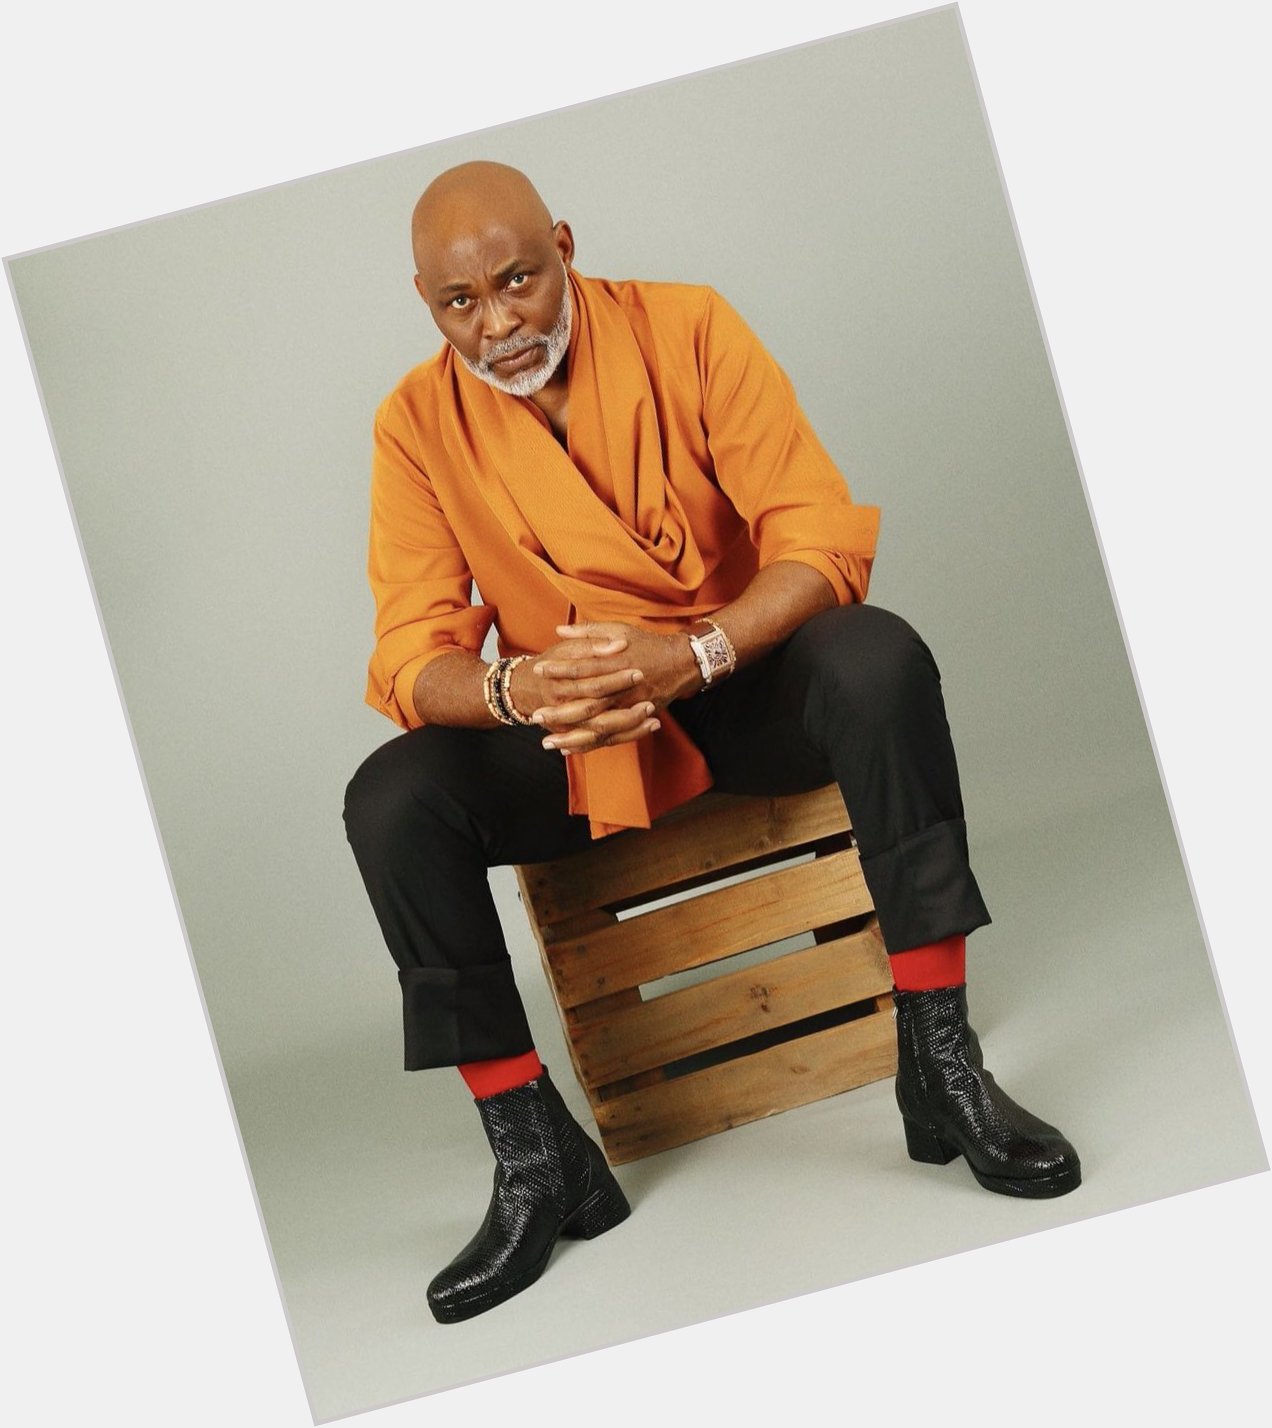 Happy 61st birthday to Nollywood actor, Richard Mofe Damijo.

RMD forever young  